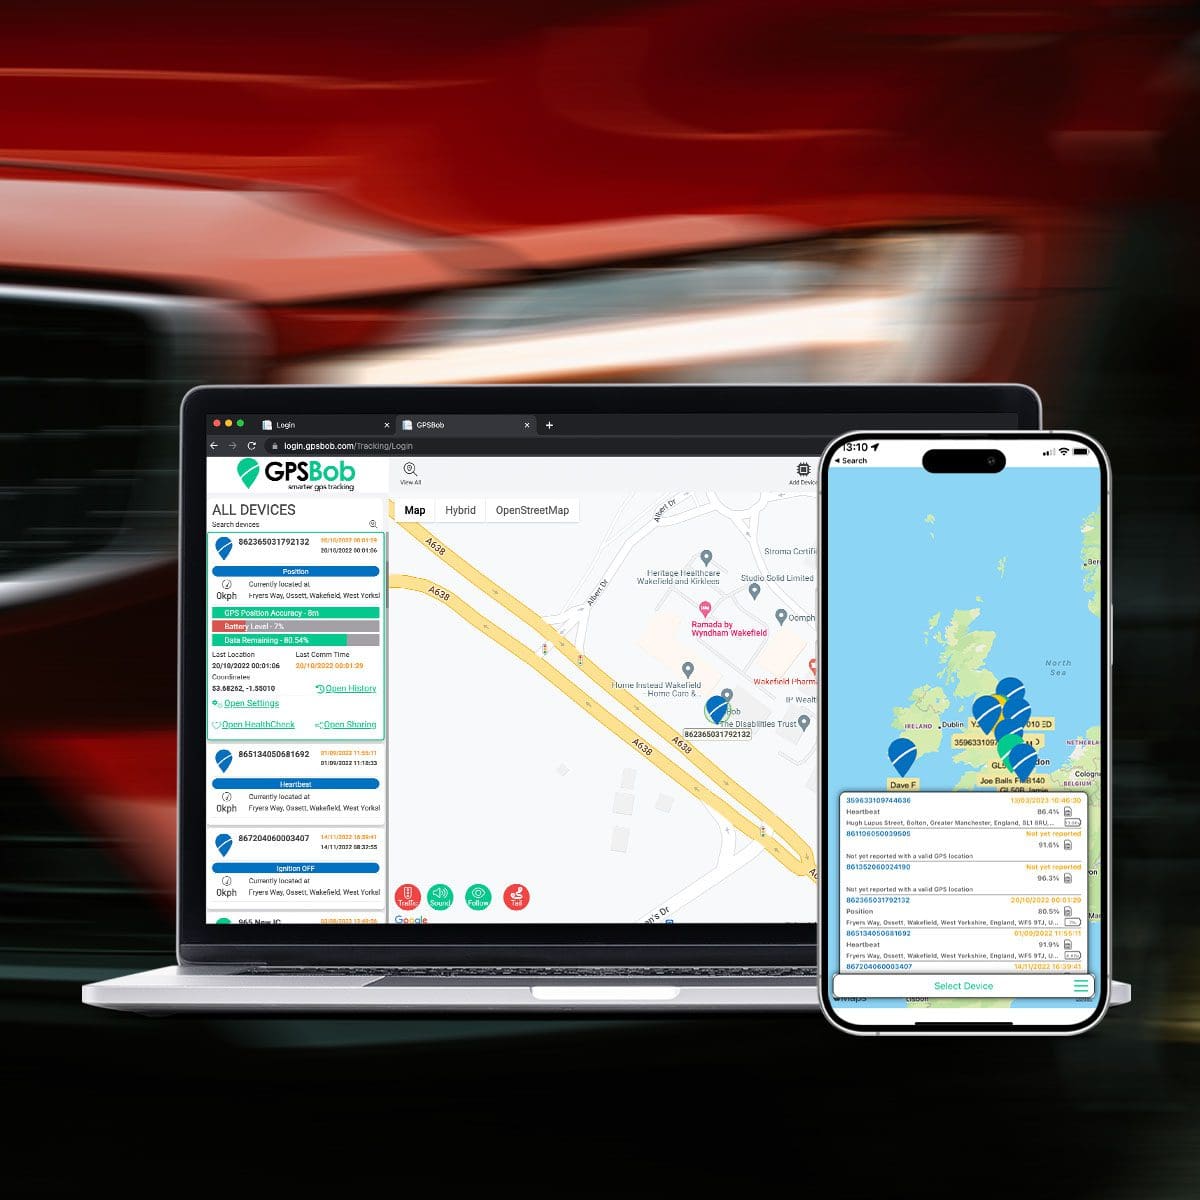 Spectacle Uden Underskrift GPS Tracking App & Software for iOS, Android & Web Browser